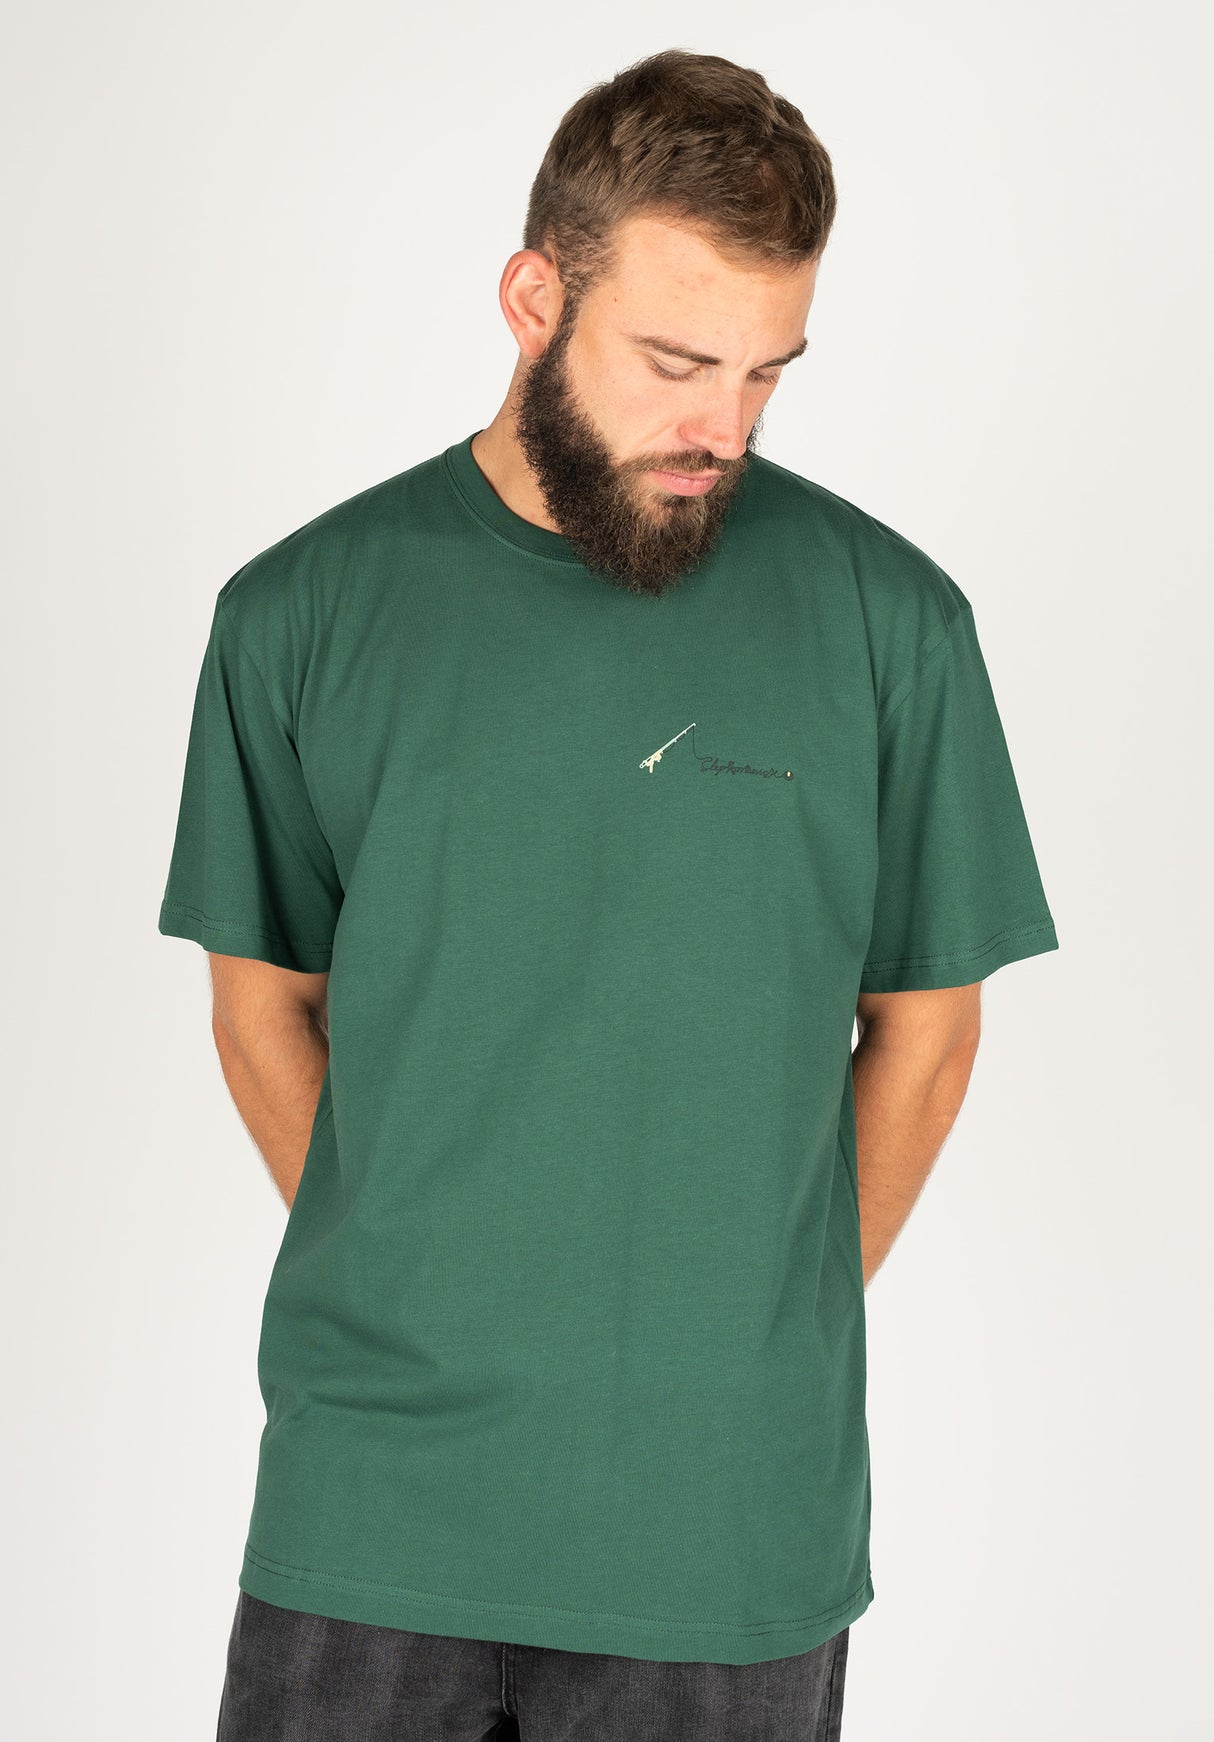 Big Fish Cleptomanicx T-Shirt in evergreen for Men – TITUS